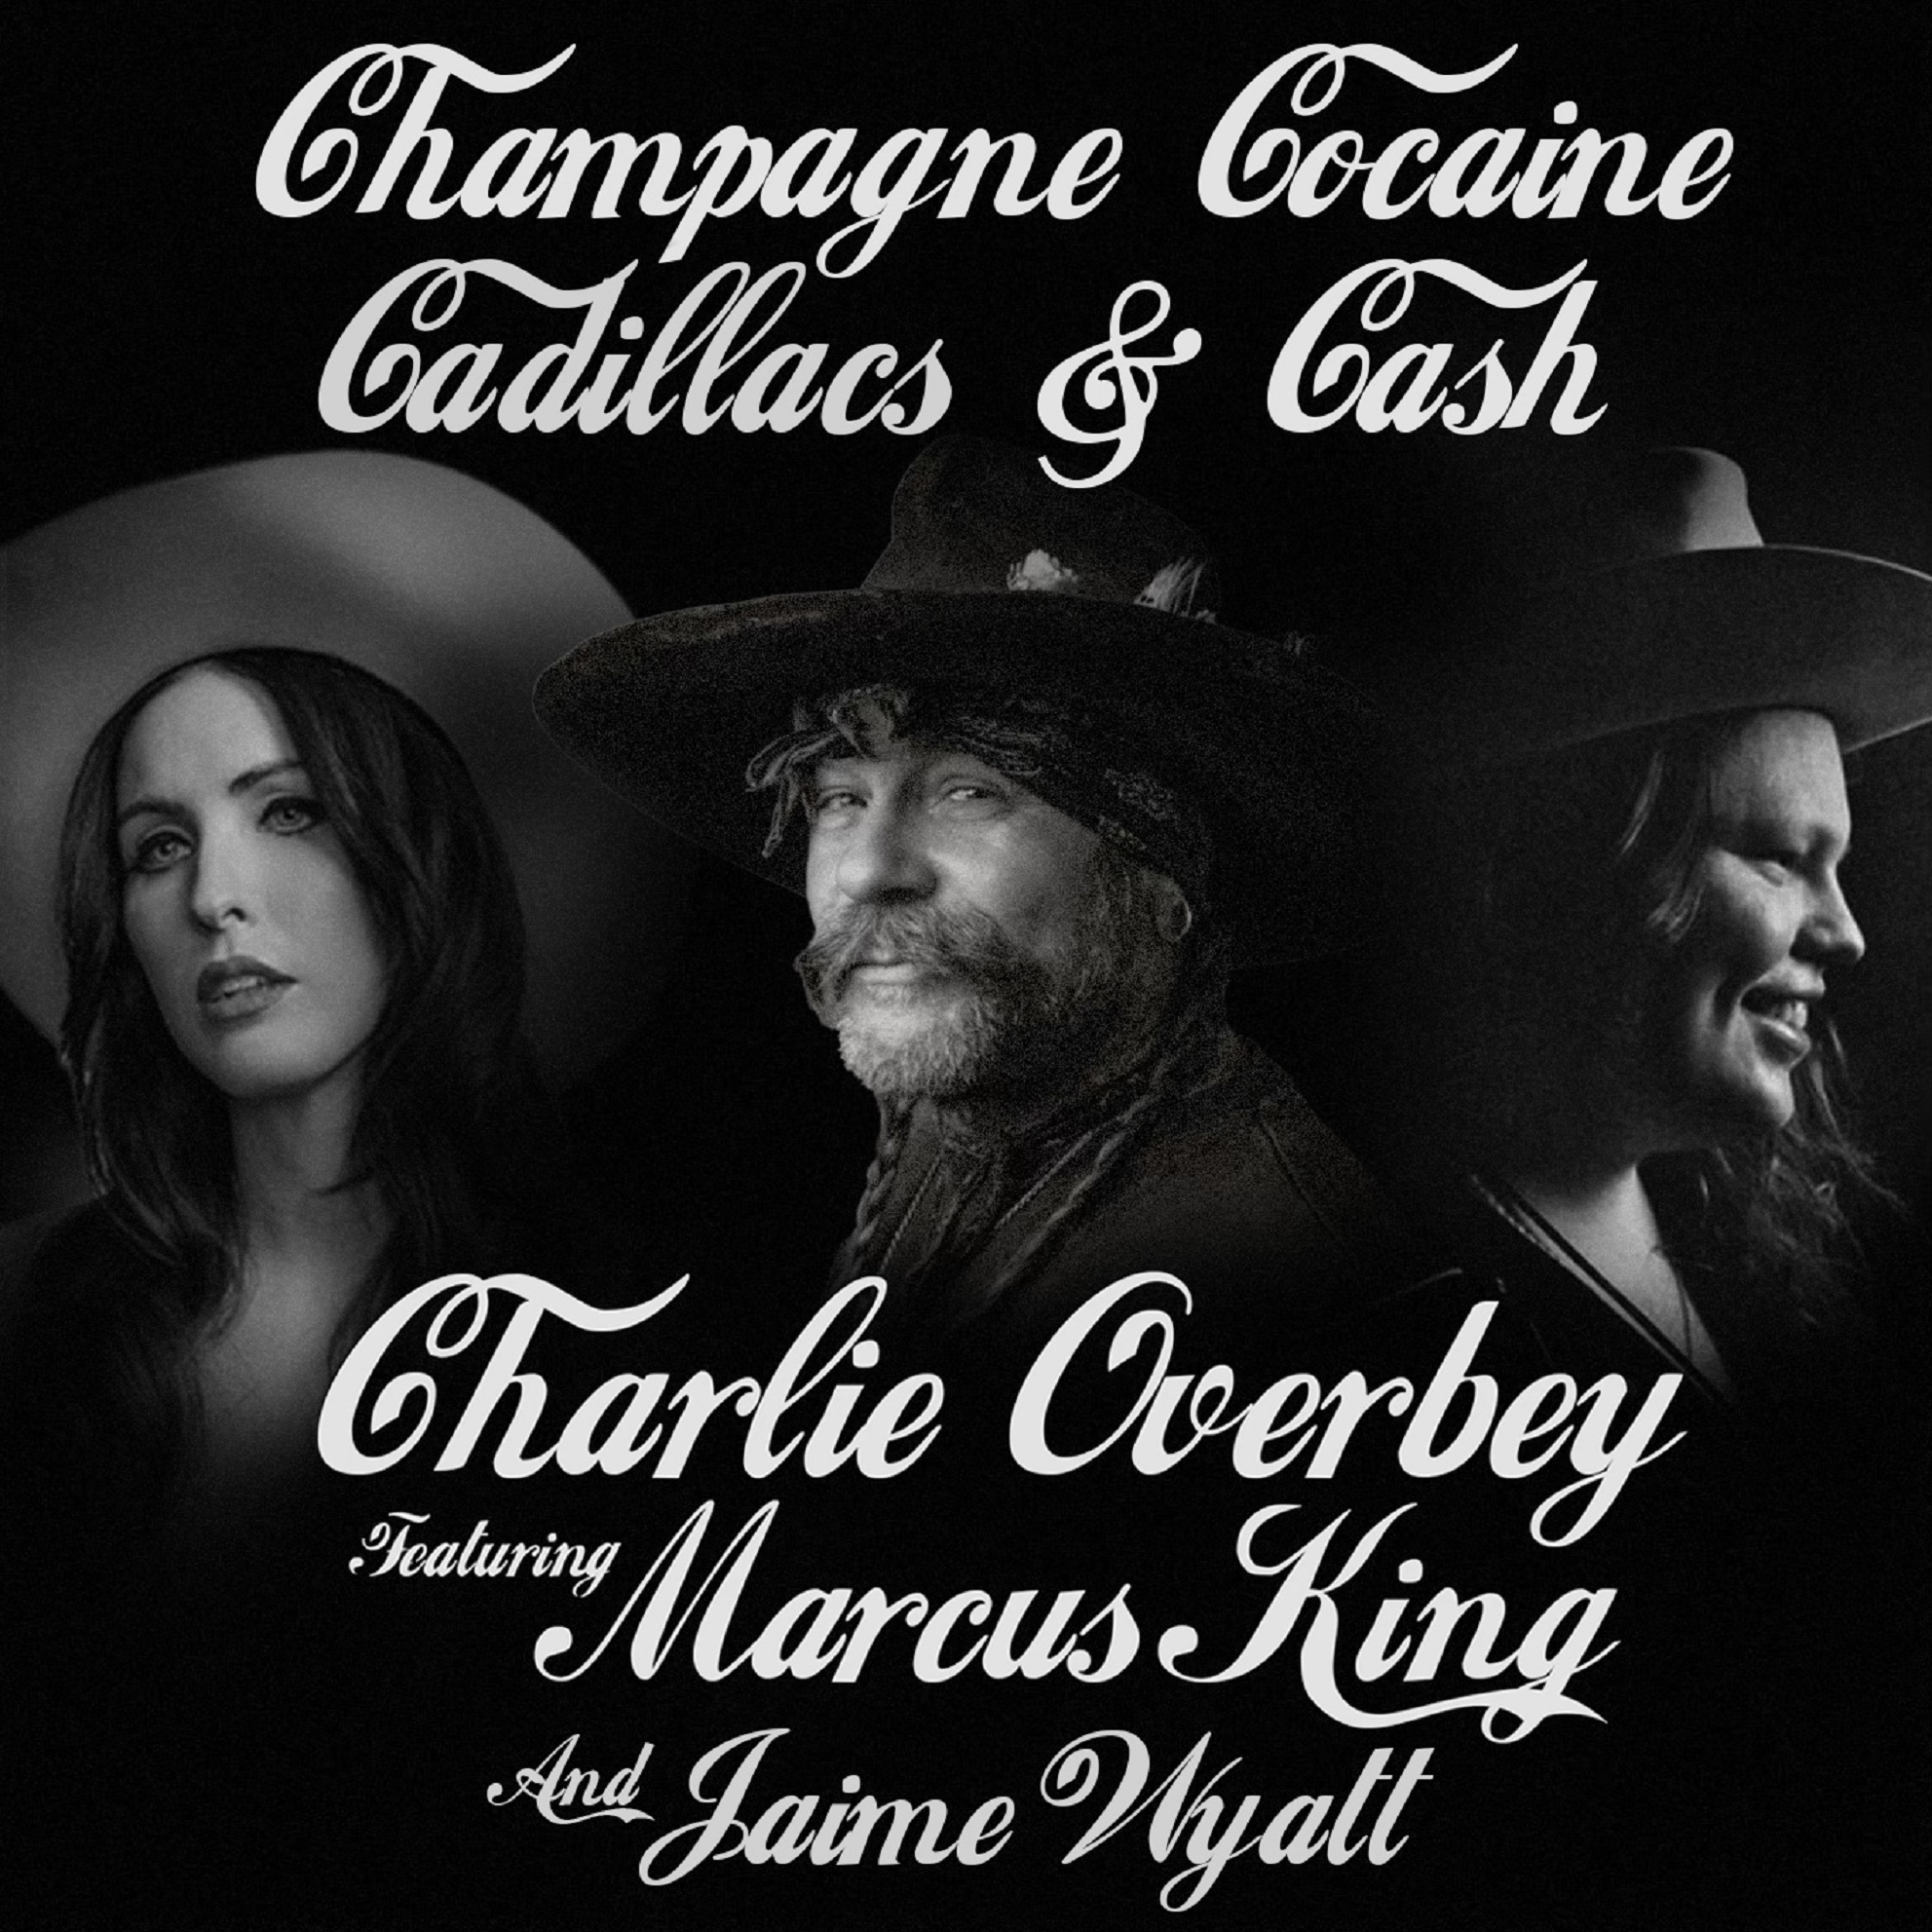 CHARLIE OVERBEY RELEASES HIS SINGLE, “CHAMPAGNE, “COCAINE, CADILLACS & CASH” FT. MARCUS KING AND JAIME WYATT